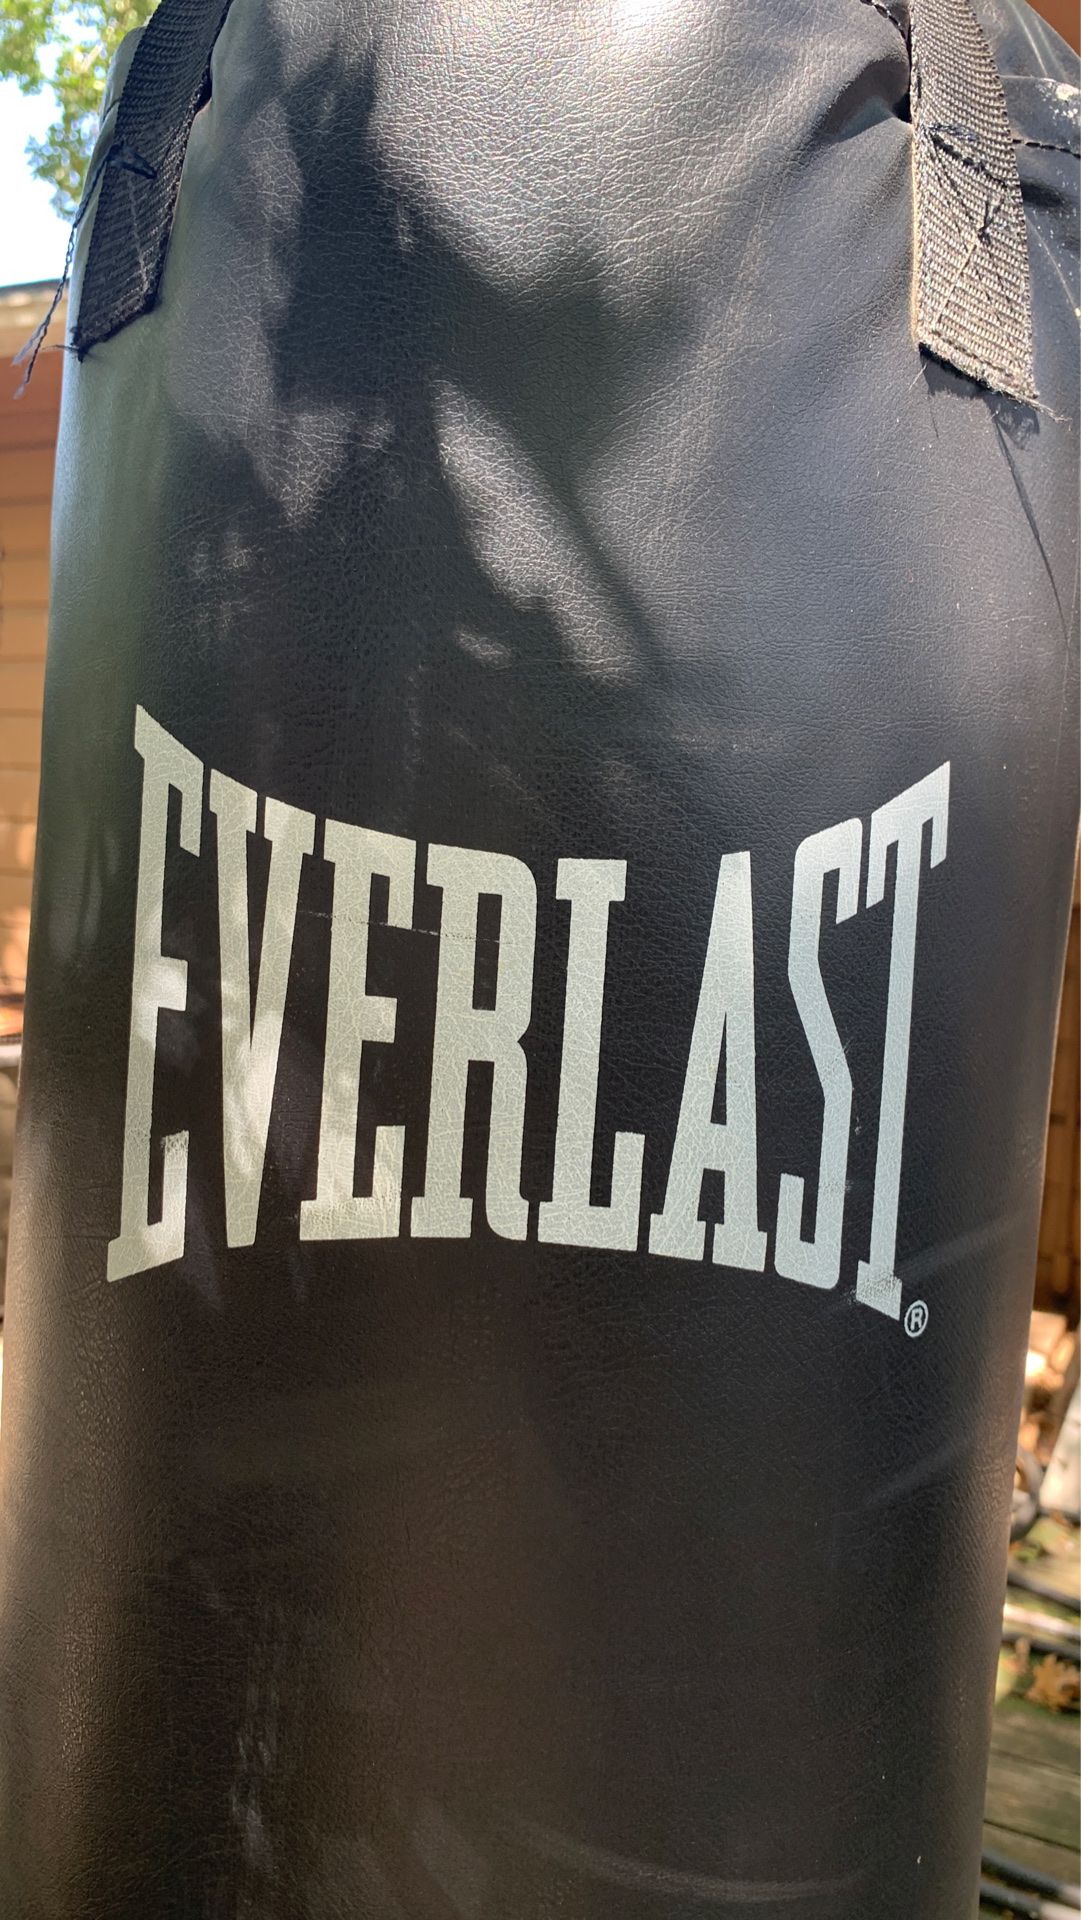 Everlast Ta:40 with stand (which must be anchored). 40 pound punching bag heavy bag speed bag boxing bag